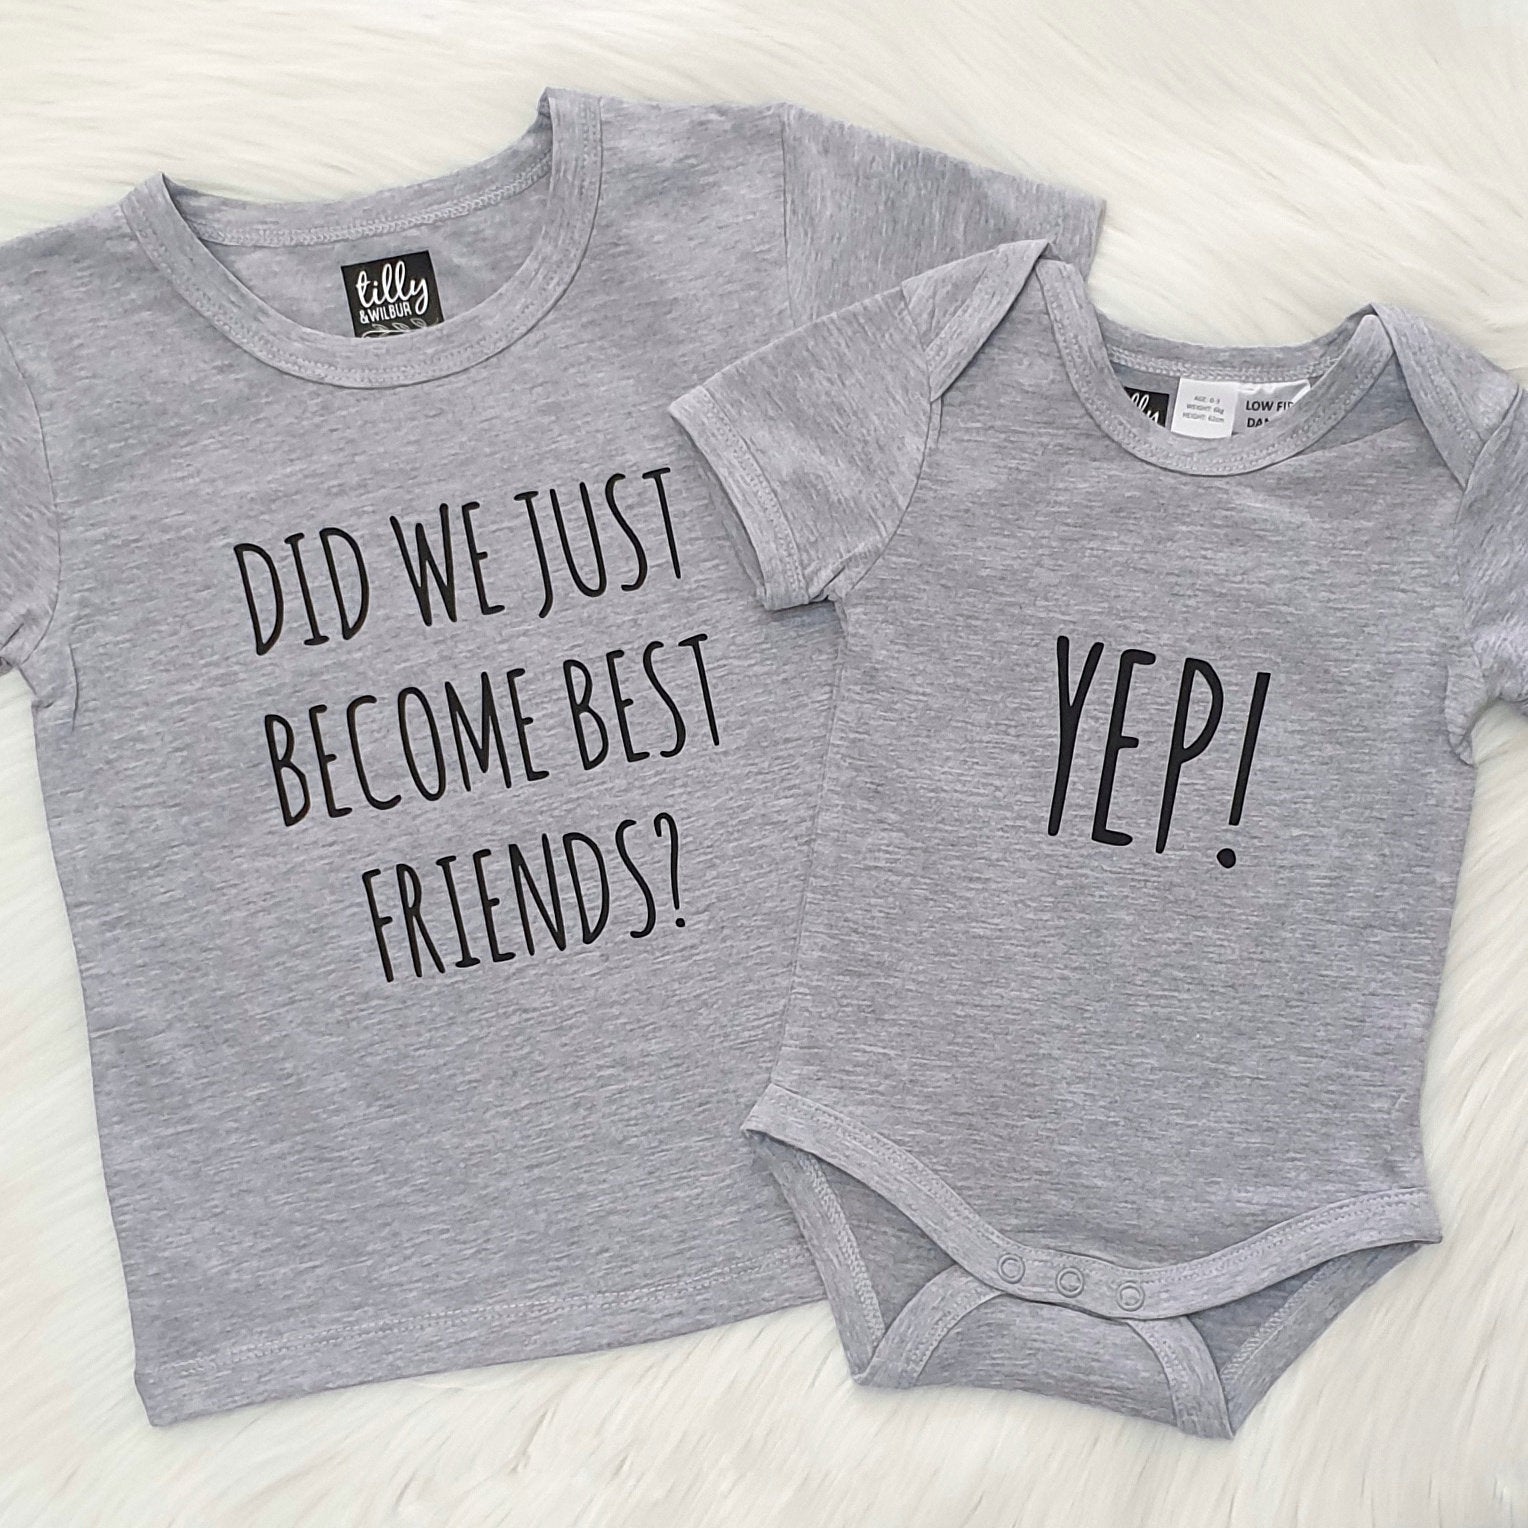 Did We just Become Best Friends? Yep! New Baby Brother Set, Big Brother Little Brother Set, Sibling Set, I&#39;m Going To Be A Big Brother Shirt